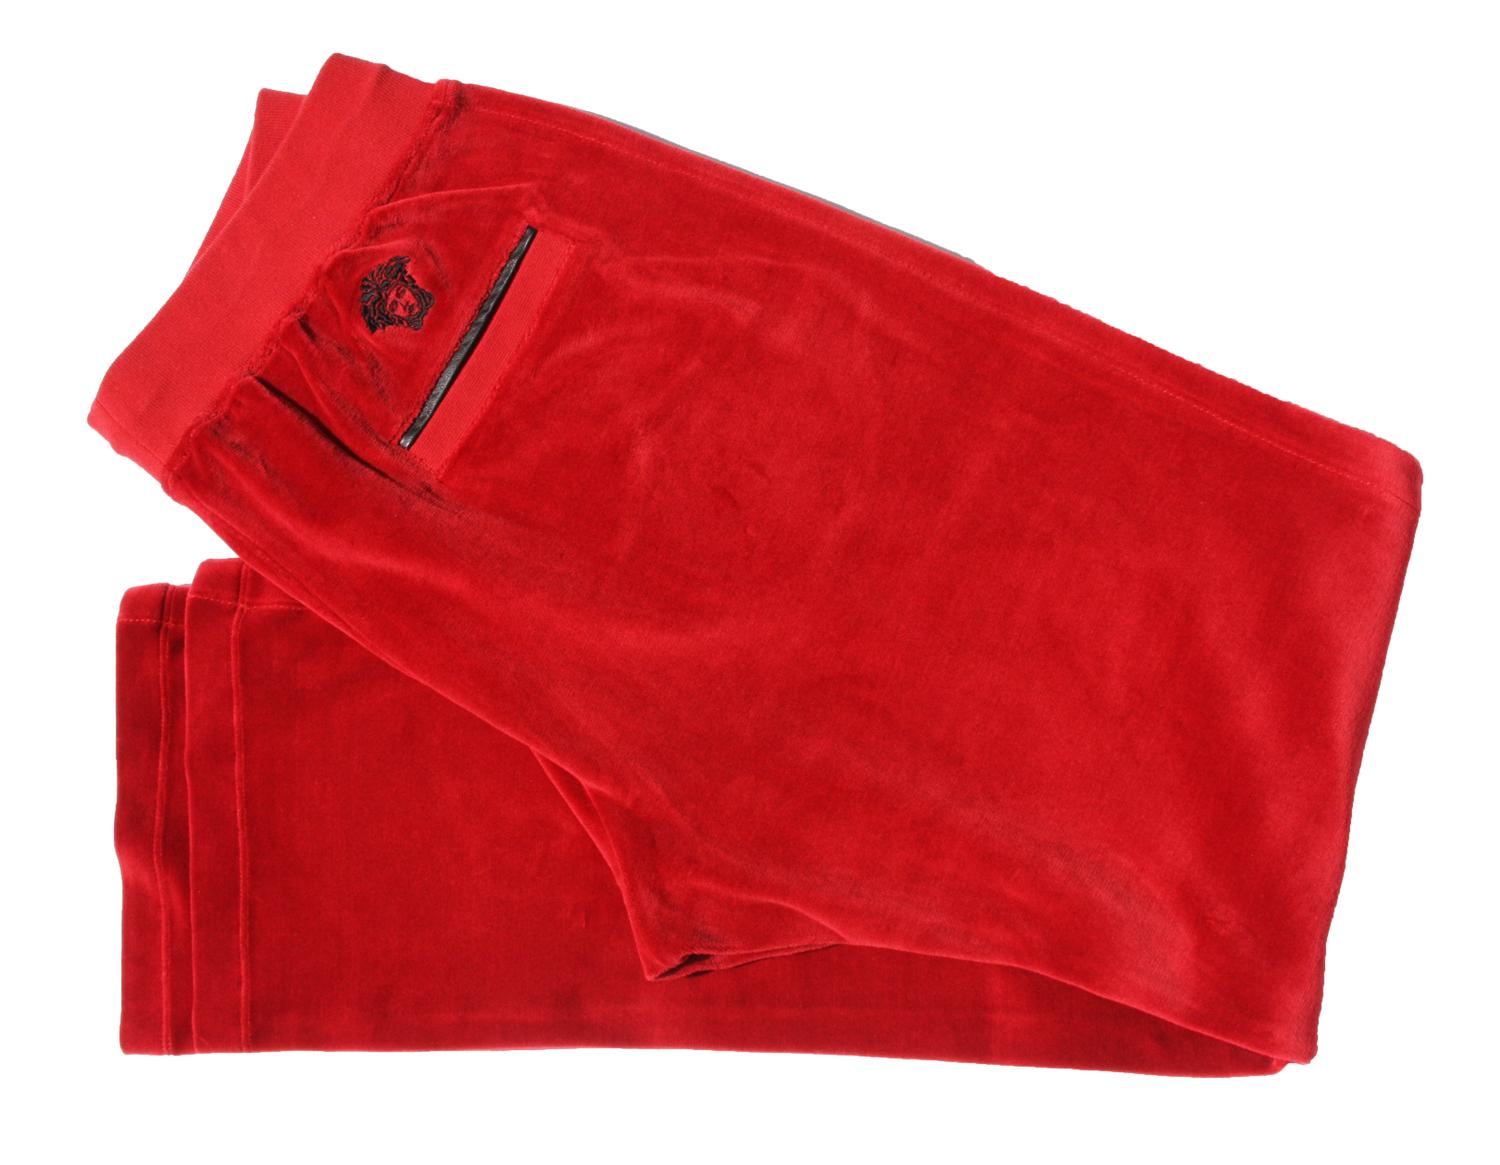 New Versace Medusa Men's Sweatpants
Designer size - XL
Red Velvet Sweatpants with Black Leather Trim
Elasticated Waistband with drawstring fastening
Gold-tone hardware finished with Versace Logo
Side Slit Pockets and Rear Pocket with Leather